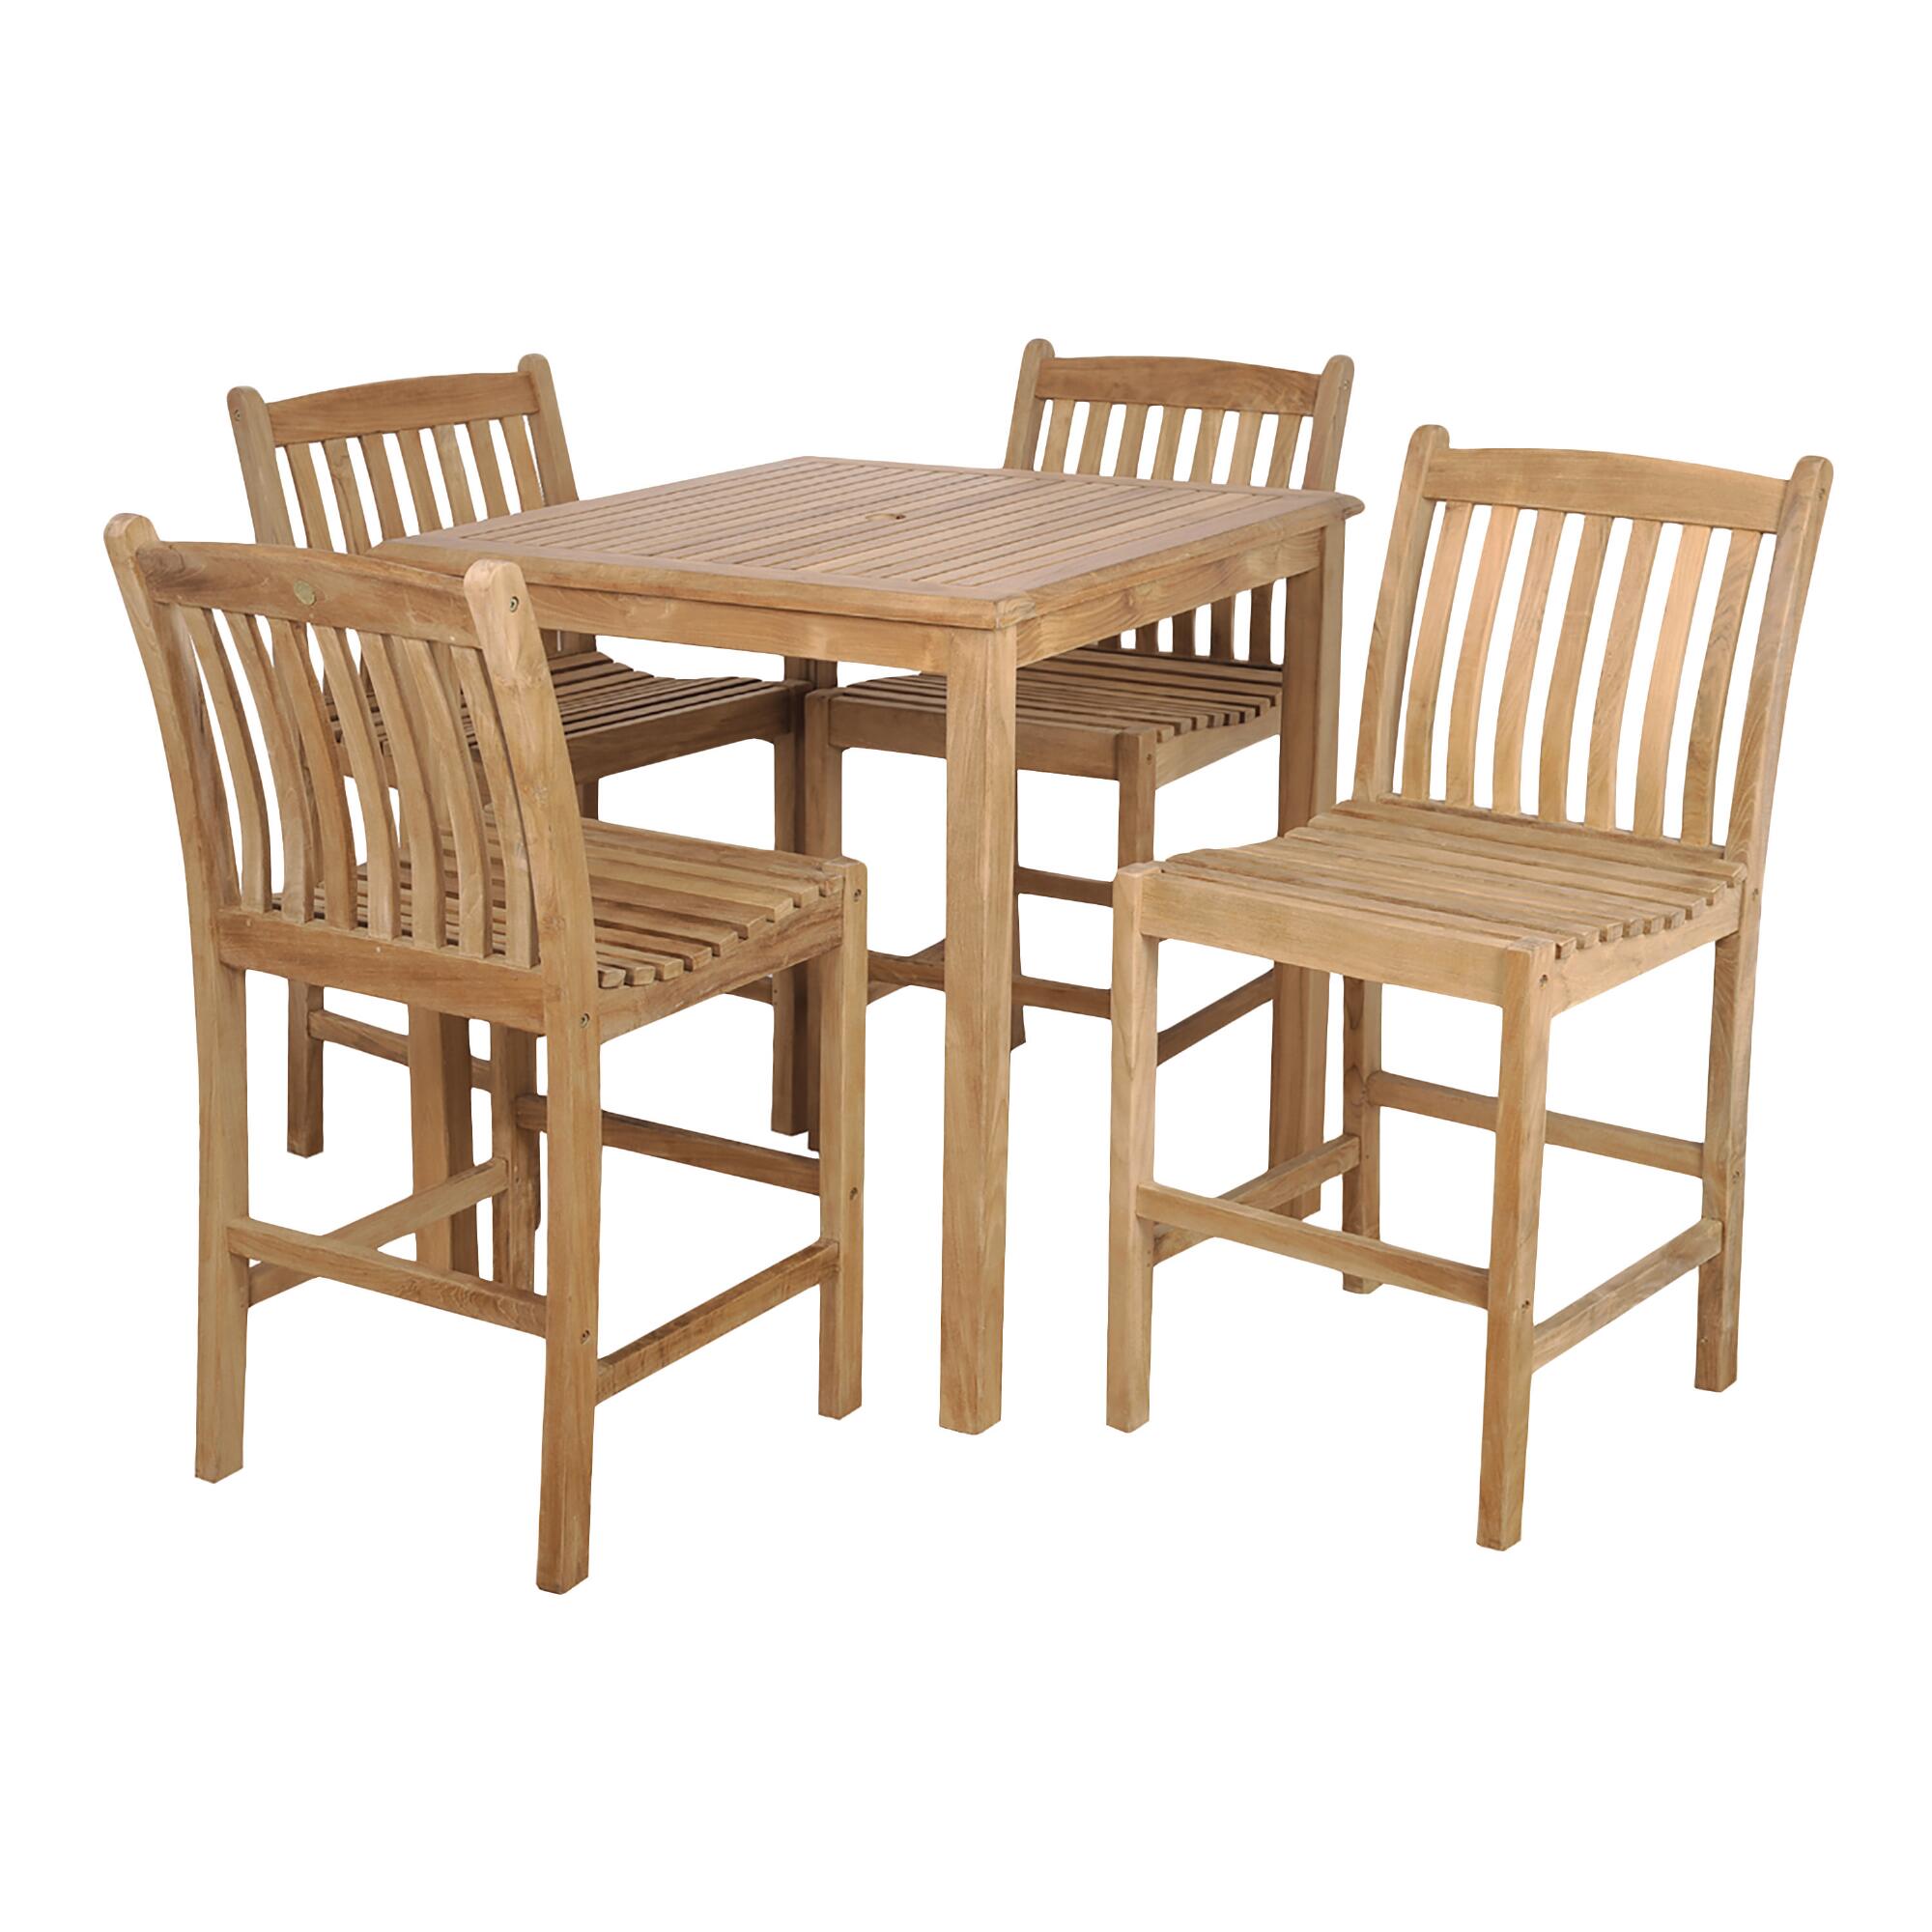 Teak Windsong Outdoor Patio Pub Dining Collection by World Market